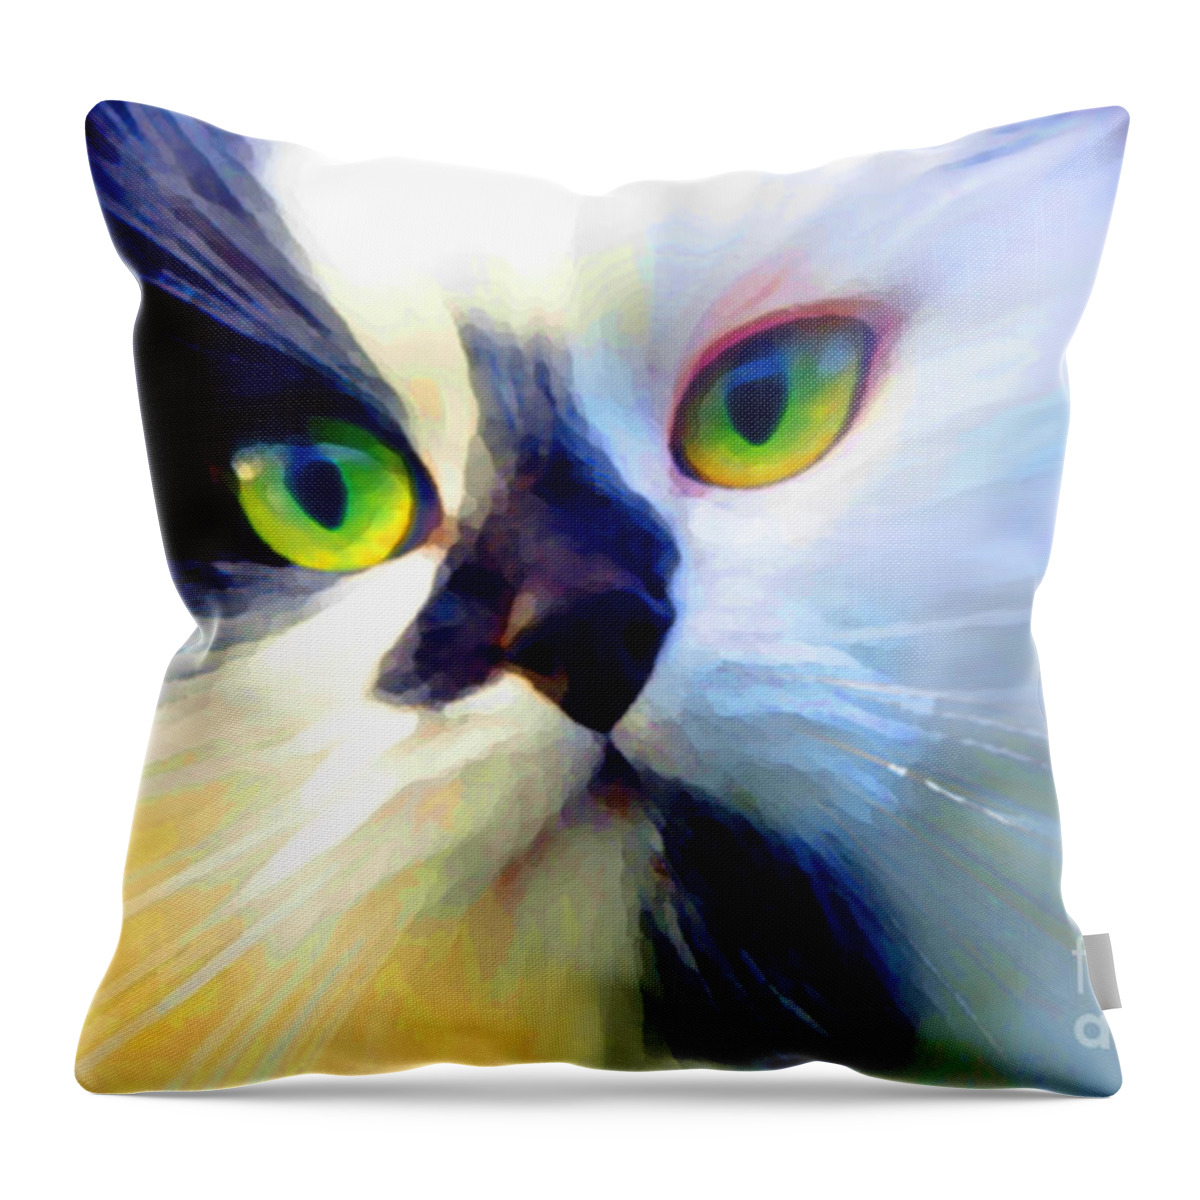 Animal Throw Pillow featuring the photograph Tinker by Adria Trail